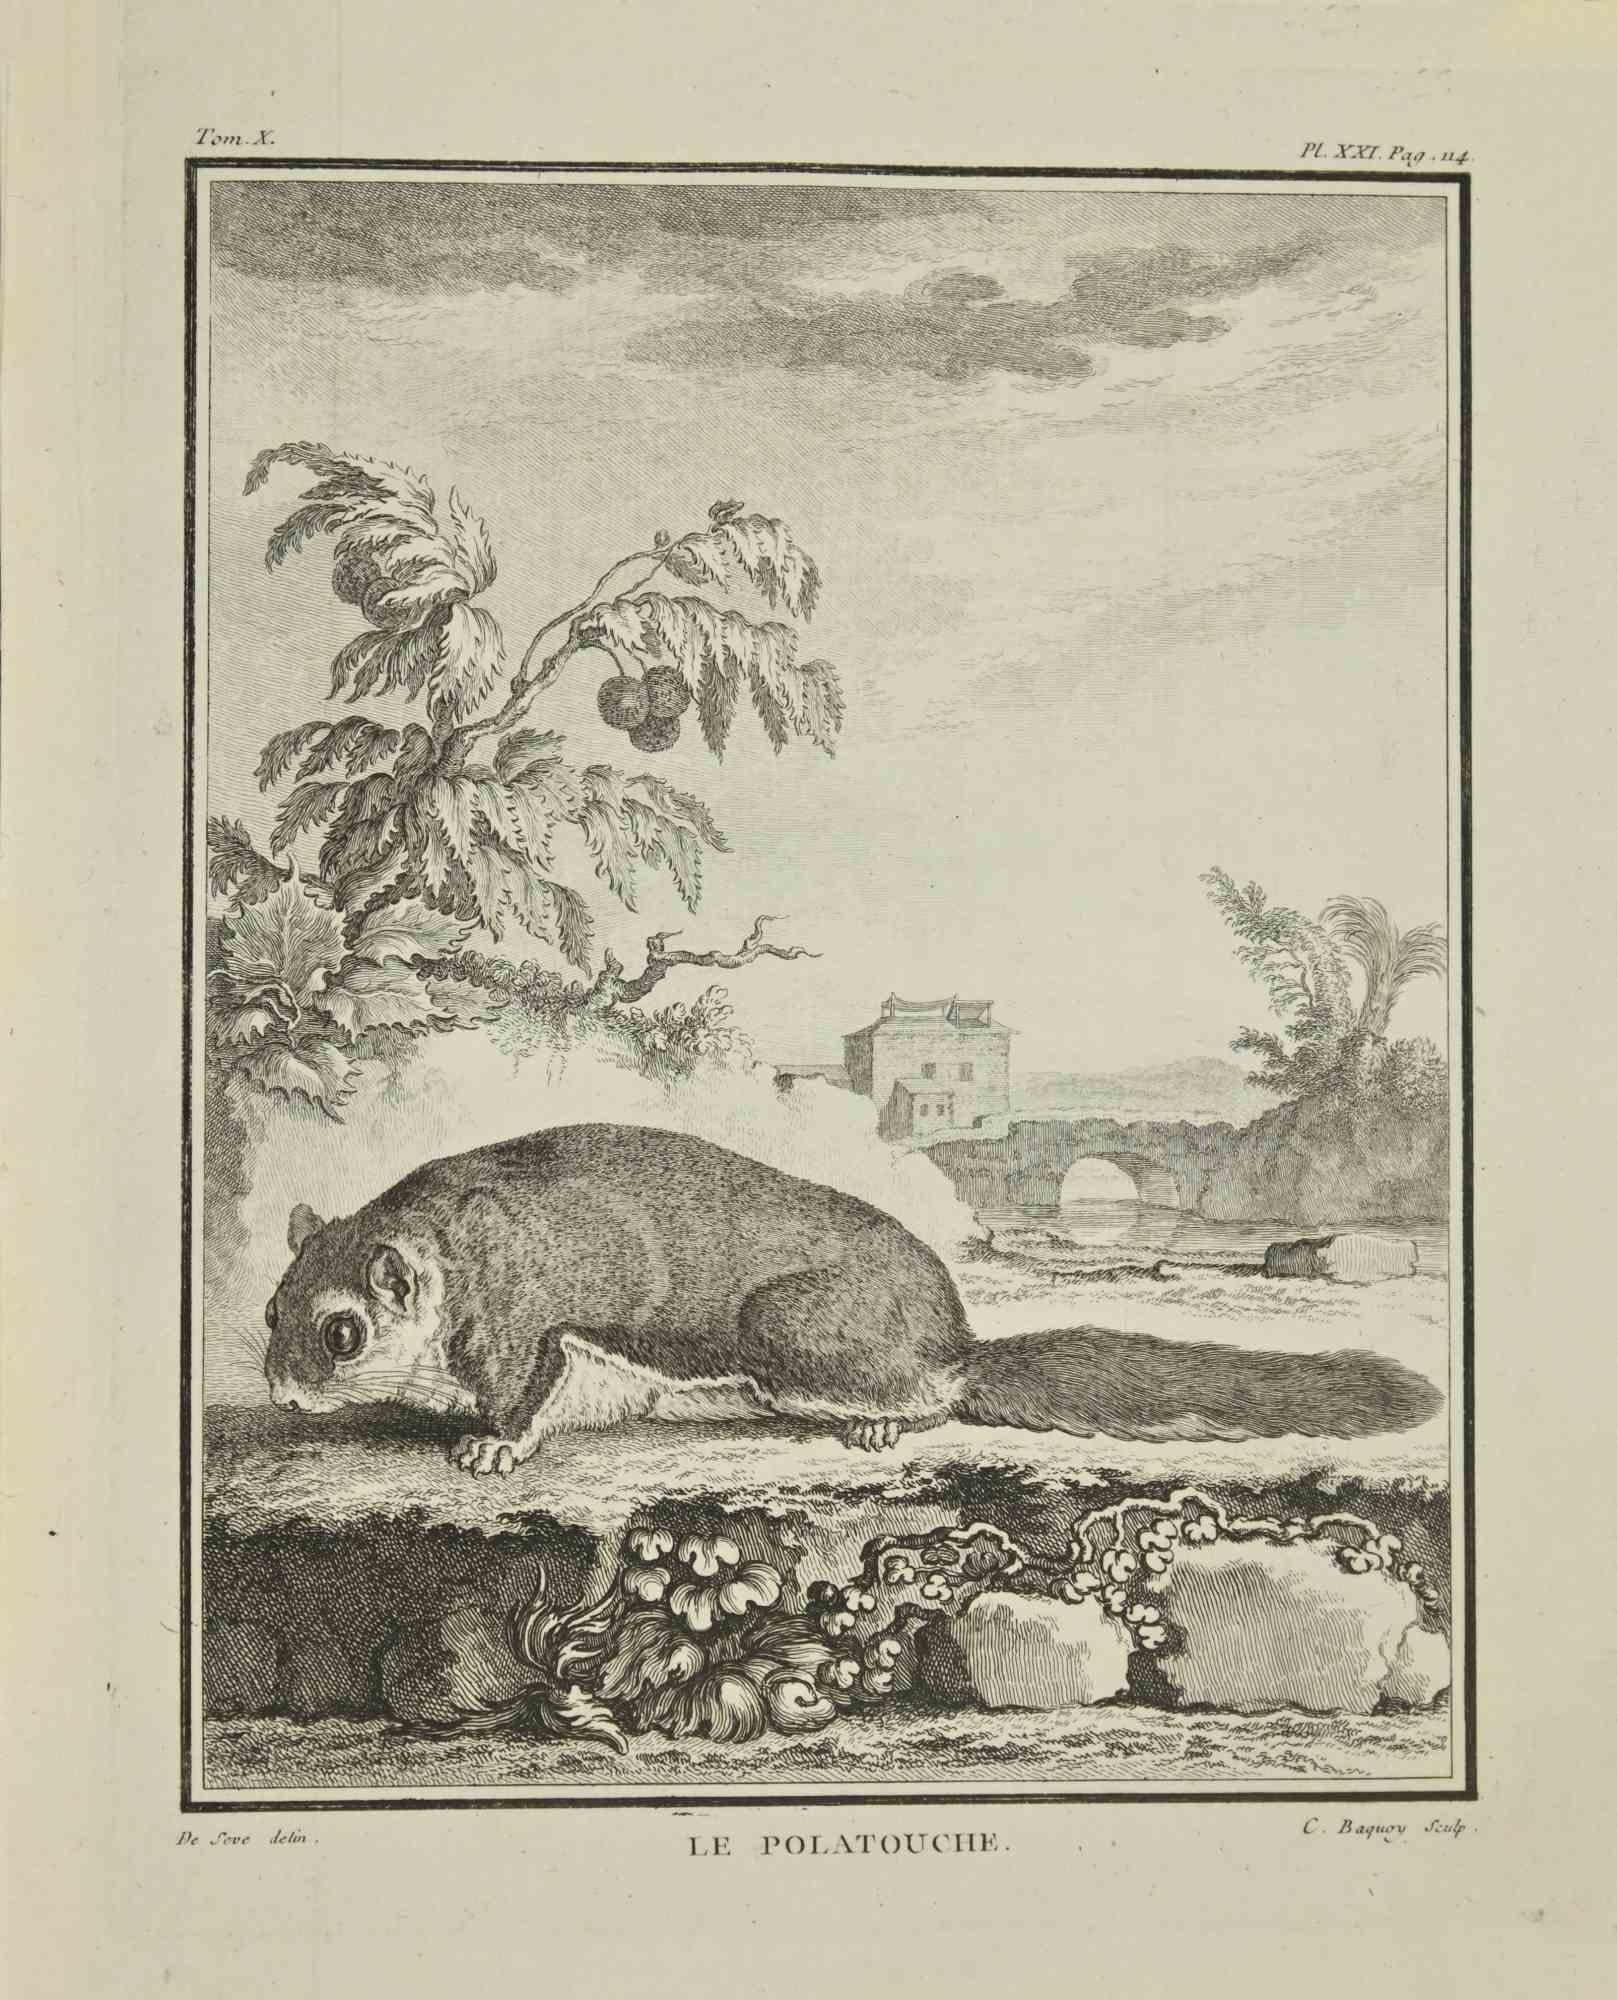 Le Polatouche is an etching realized by Jean Charles Baquoy in 1771.

It belongs to the suite "Histoire Naturelle de Buffon".

The Artist's signature is engraved lower right.

Good conditions.